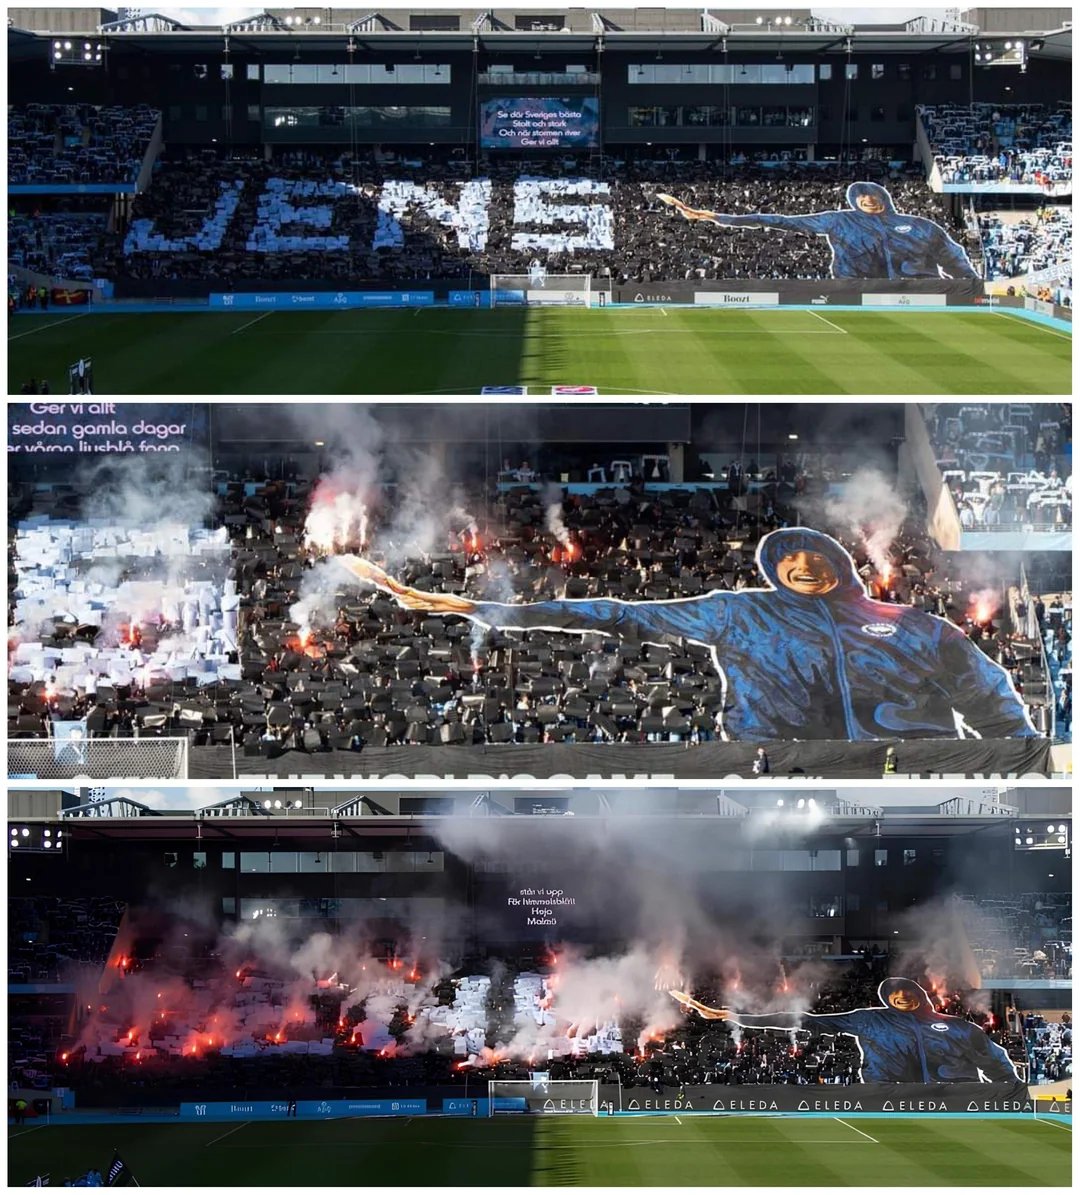 Malmö FF with a beautiful tifo honoring Jens Larsson, a 28-year-old supporter who passed away in December. 🇸🇪❤️